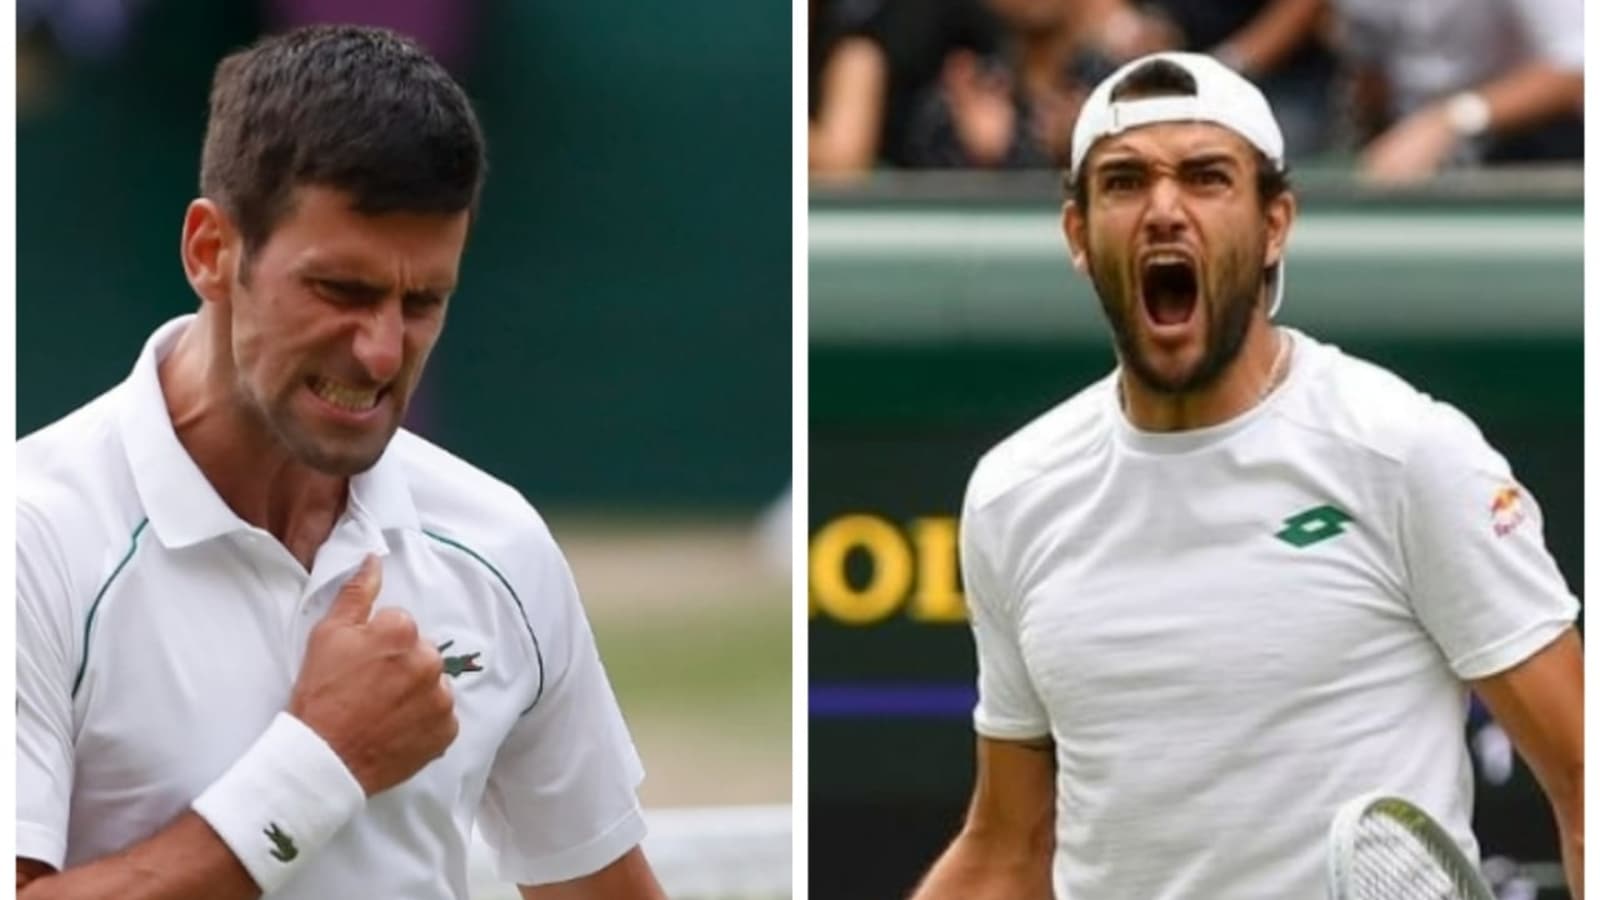 Djokovic Vs Berrettini Wimbledon 2021 Final Live Streaming Online When and Where to watch on TV and online Tennis News